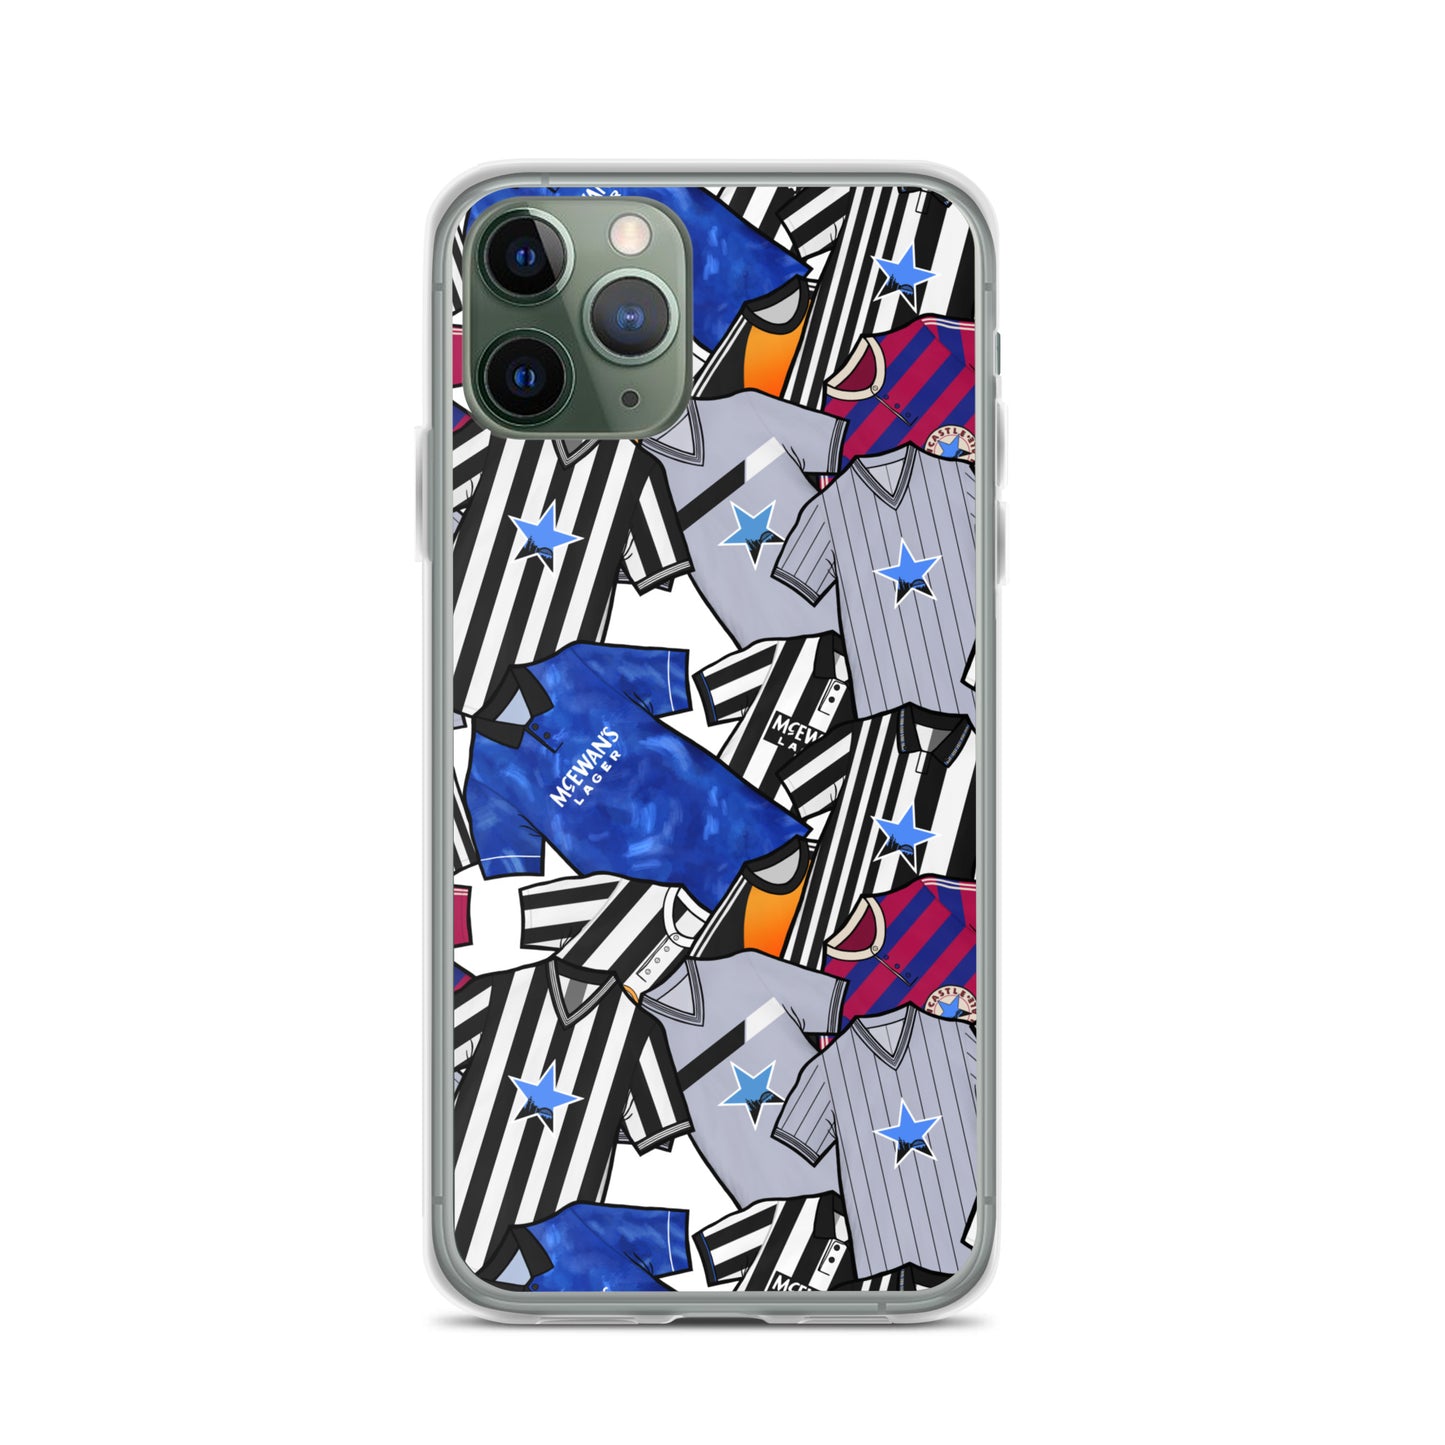 Phone case for iPhone 11 Pro inspired by the Retro shirts of Newcastle United!